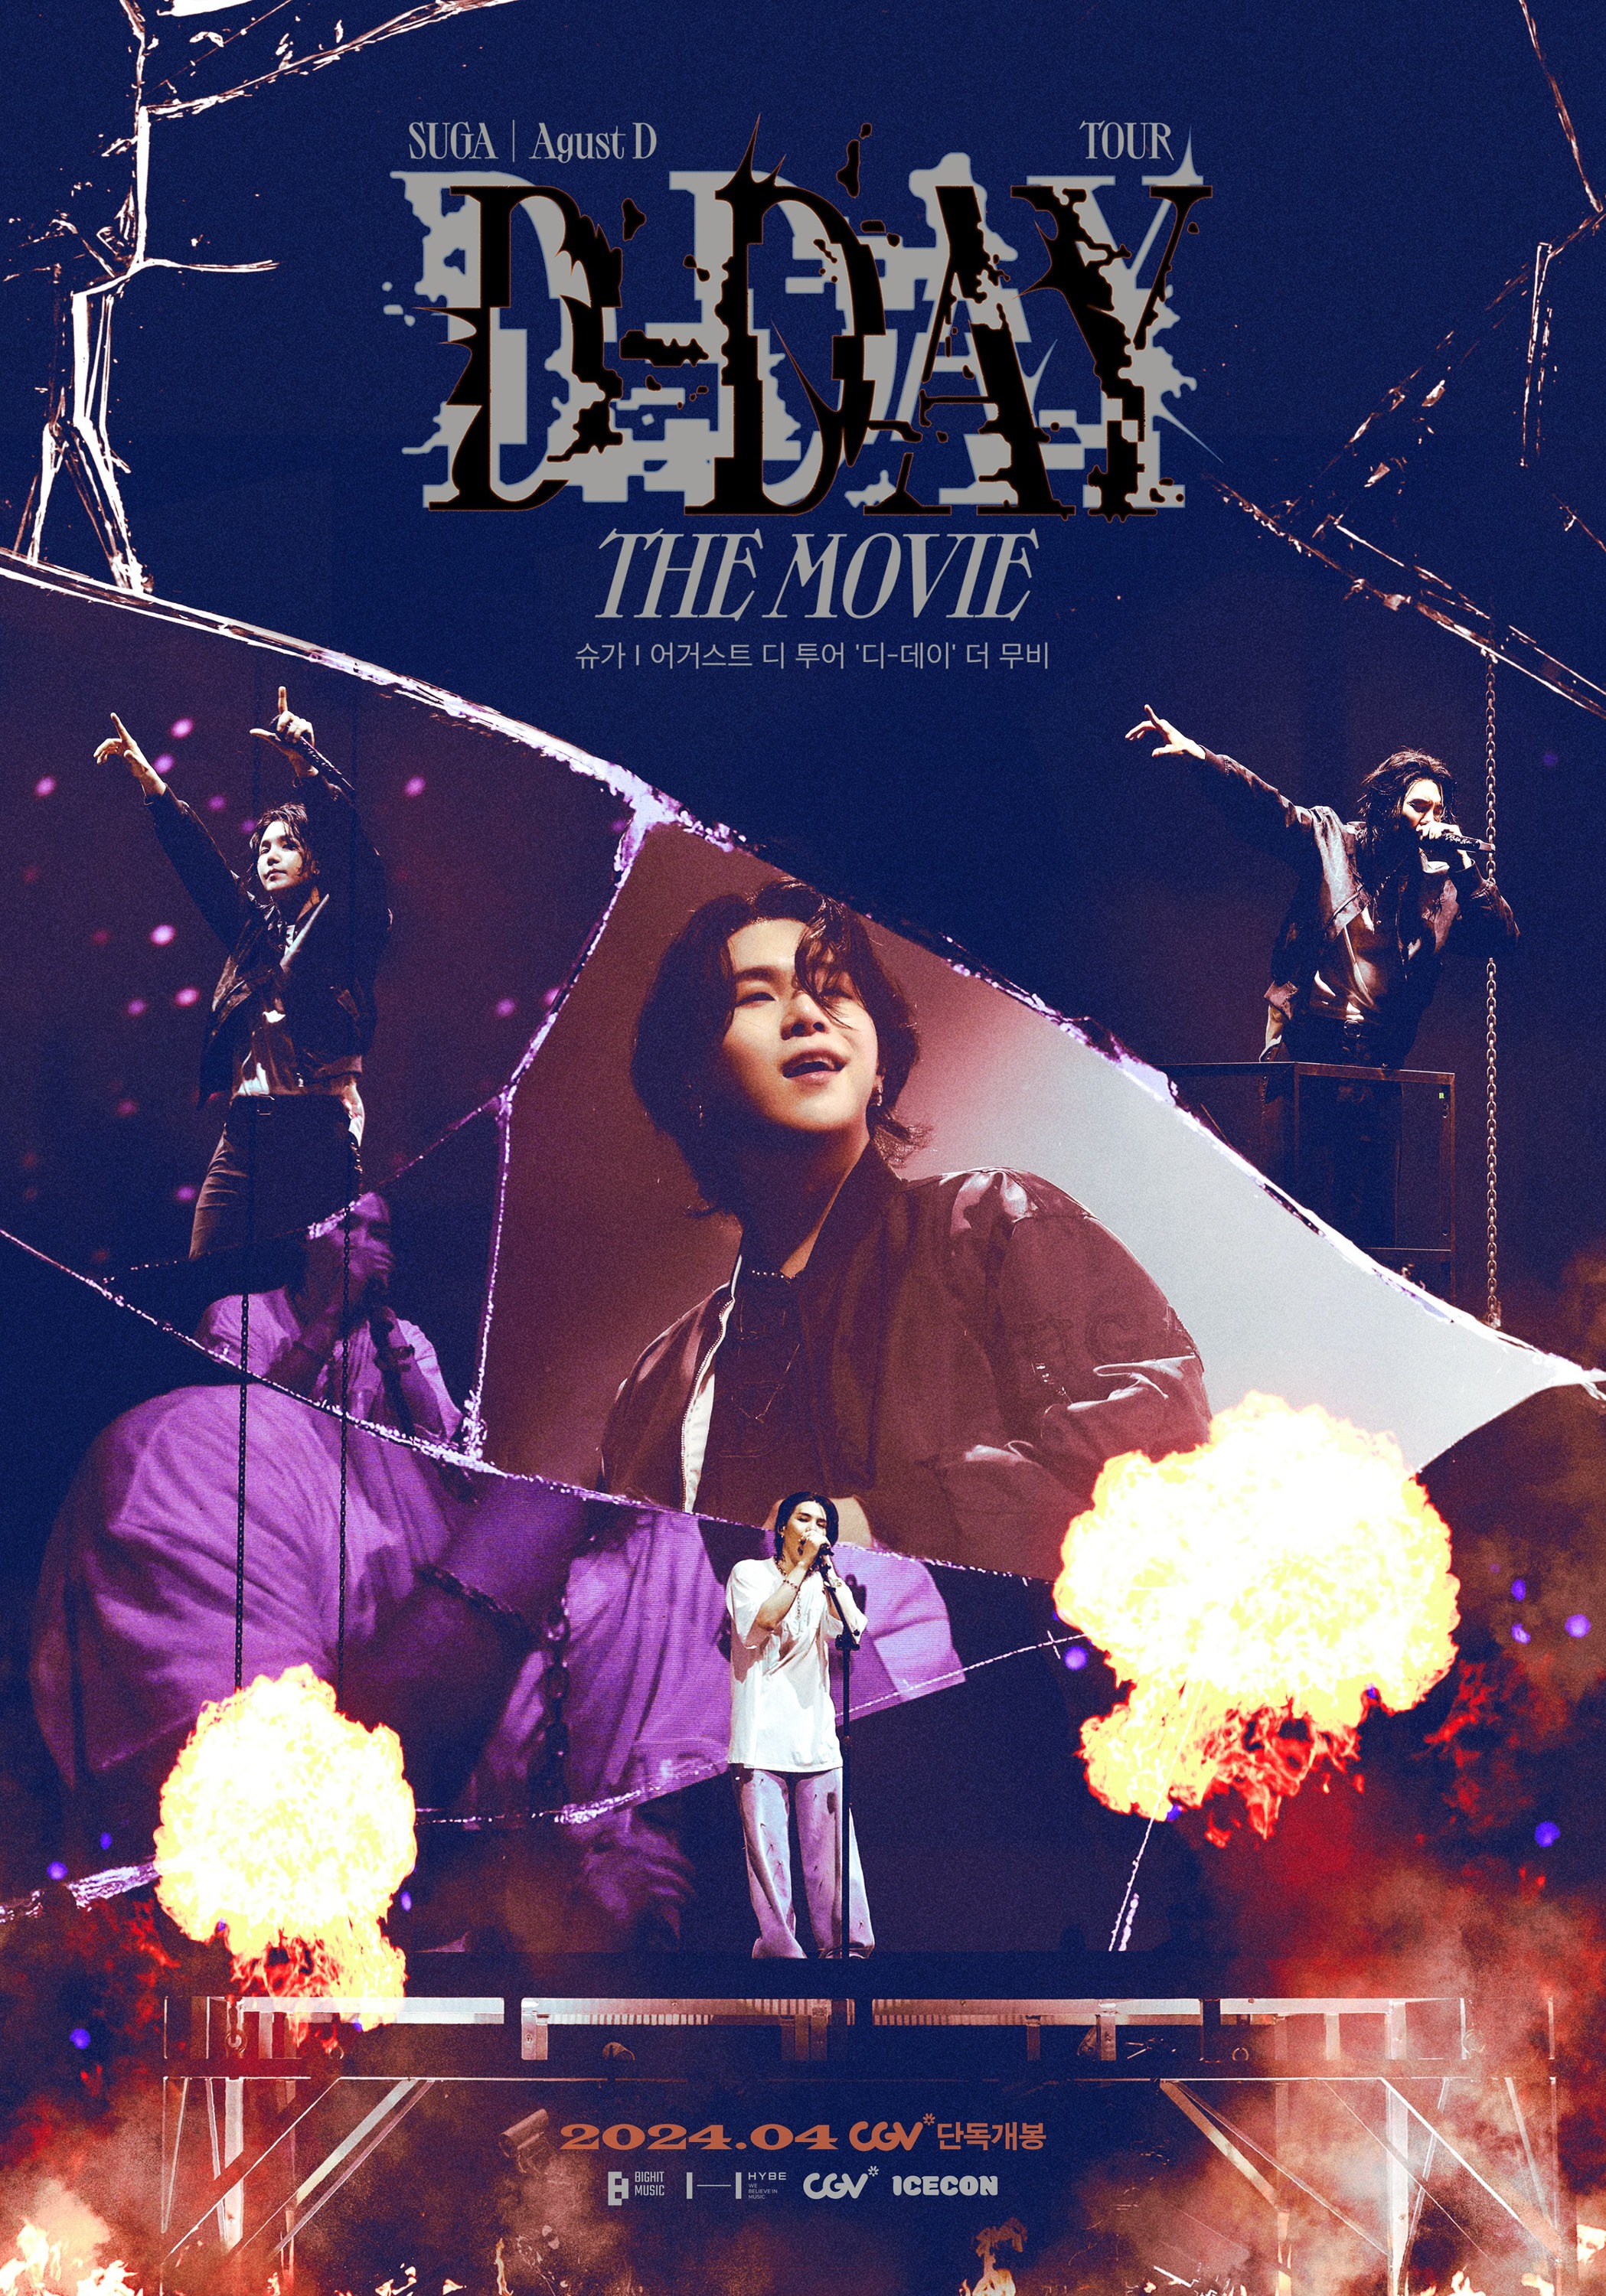 Mega Sized Movie Poster Image for SUGA | Agust D TOUR 'D-DAY' THE MOVIE 